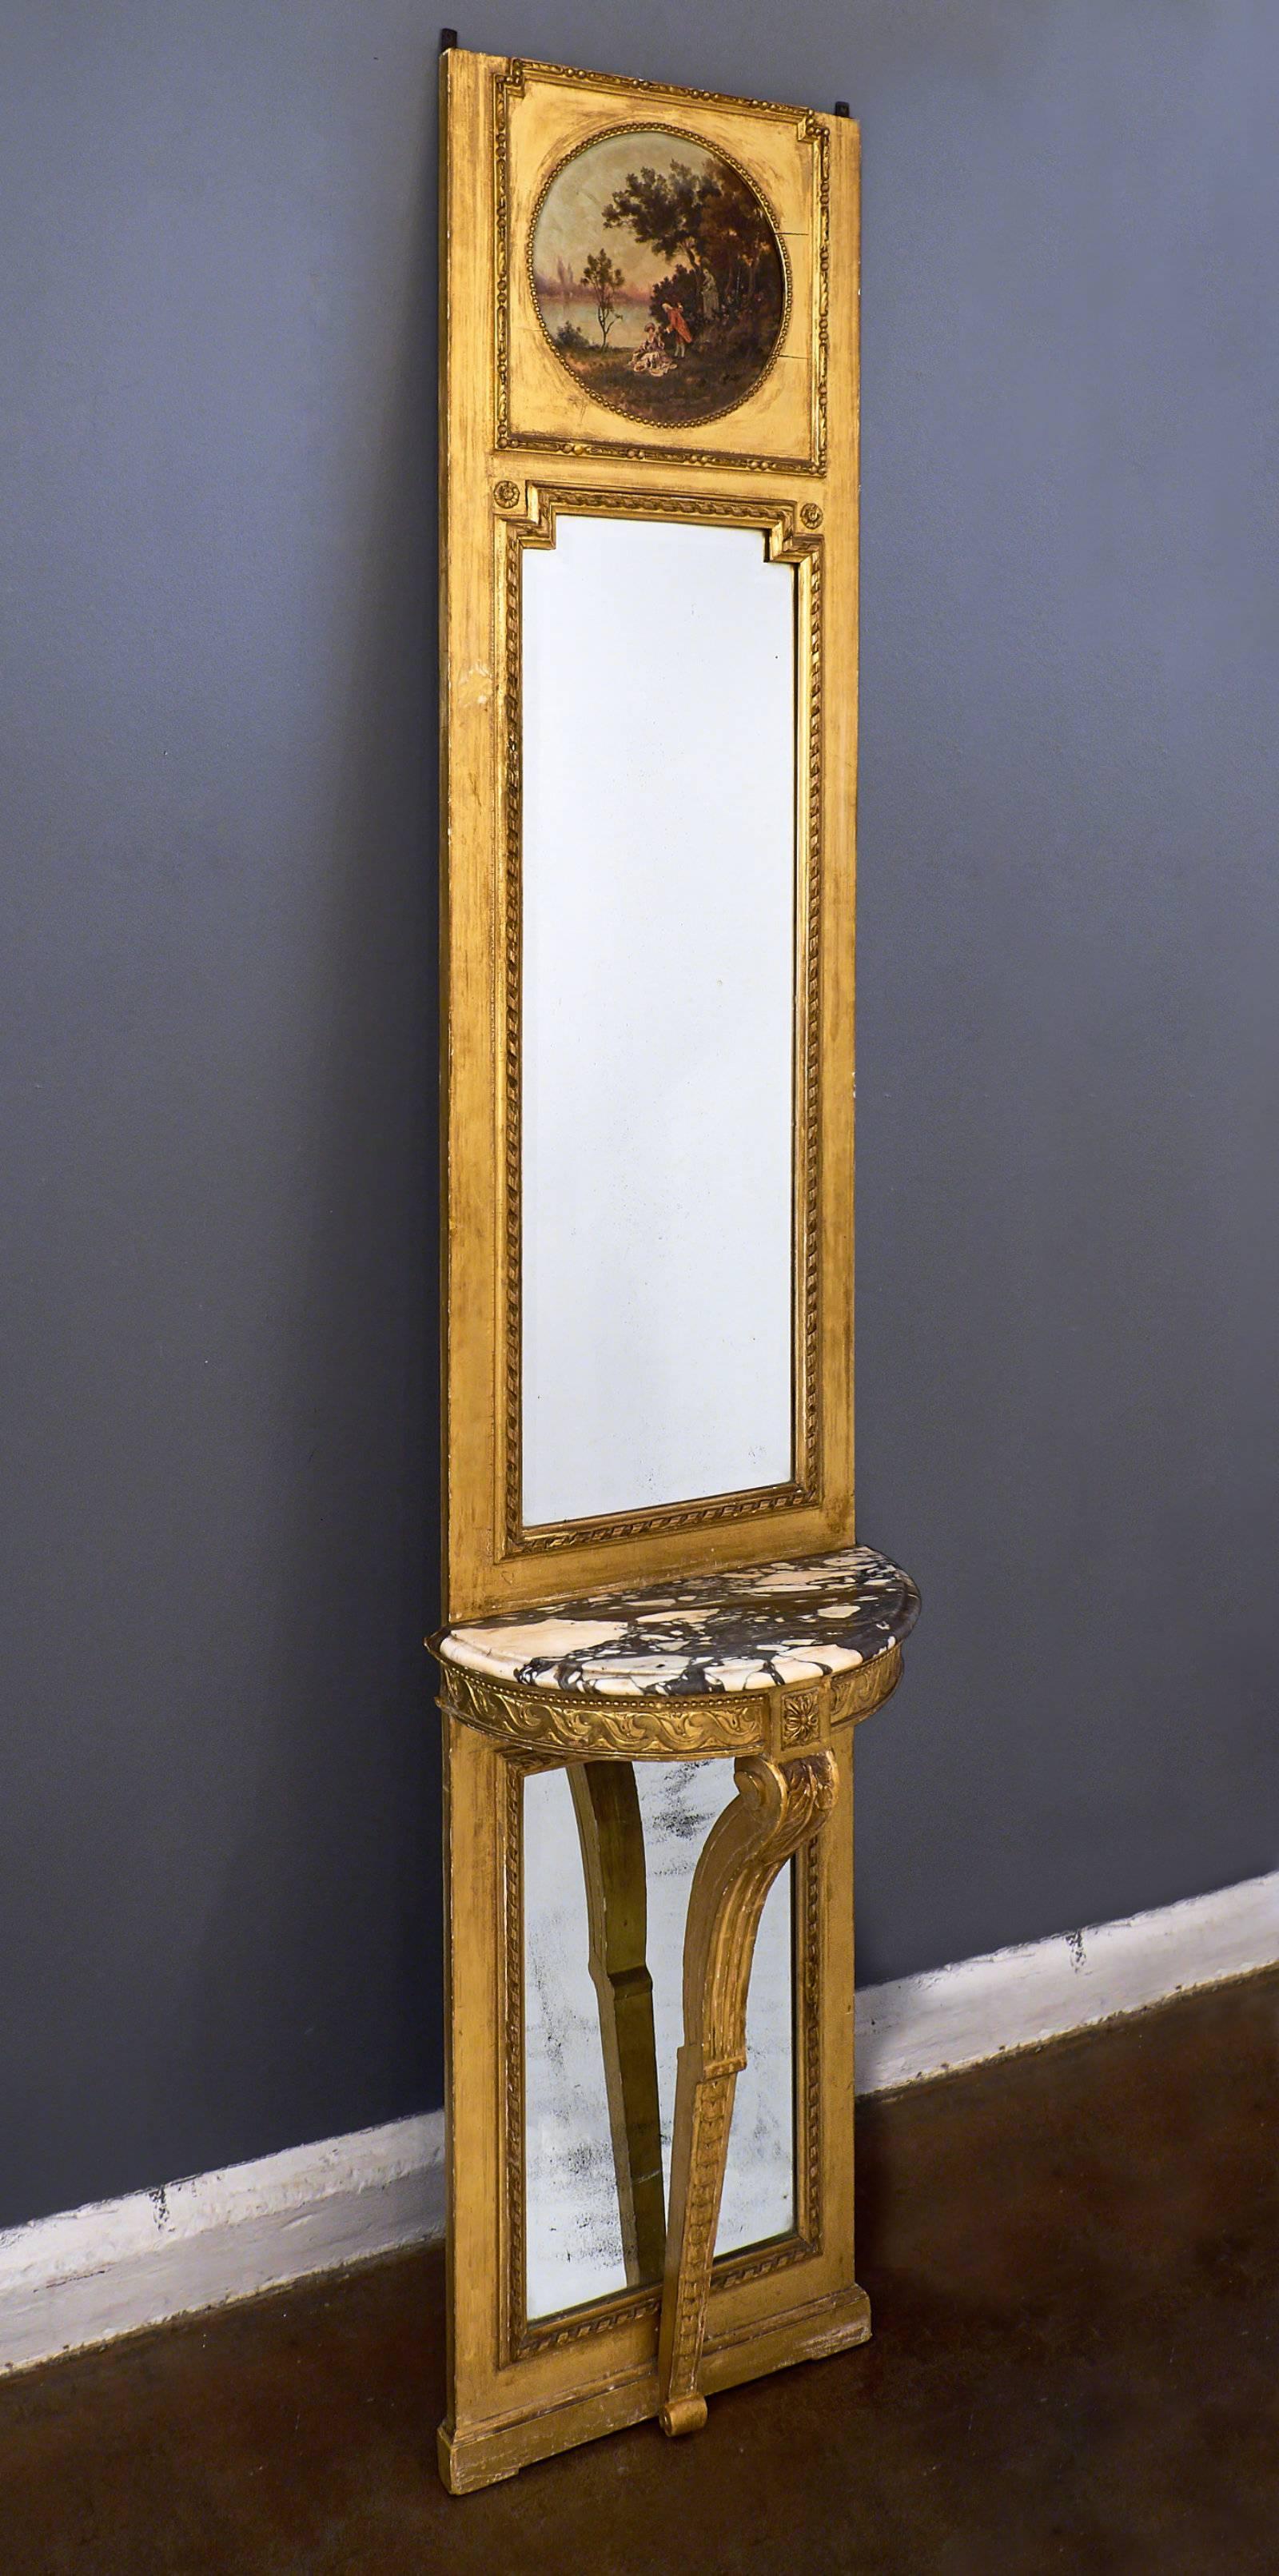 This very rare and important trumeau featuring a console style table in the Louis XVI style is hand-carved and includes neoclassical frieze details. The console table has a Brêche marble top with fantastic contrast in the veining. The mirrors are